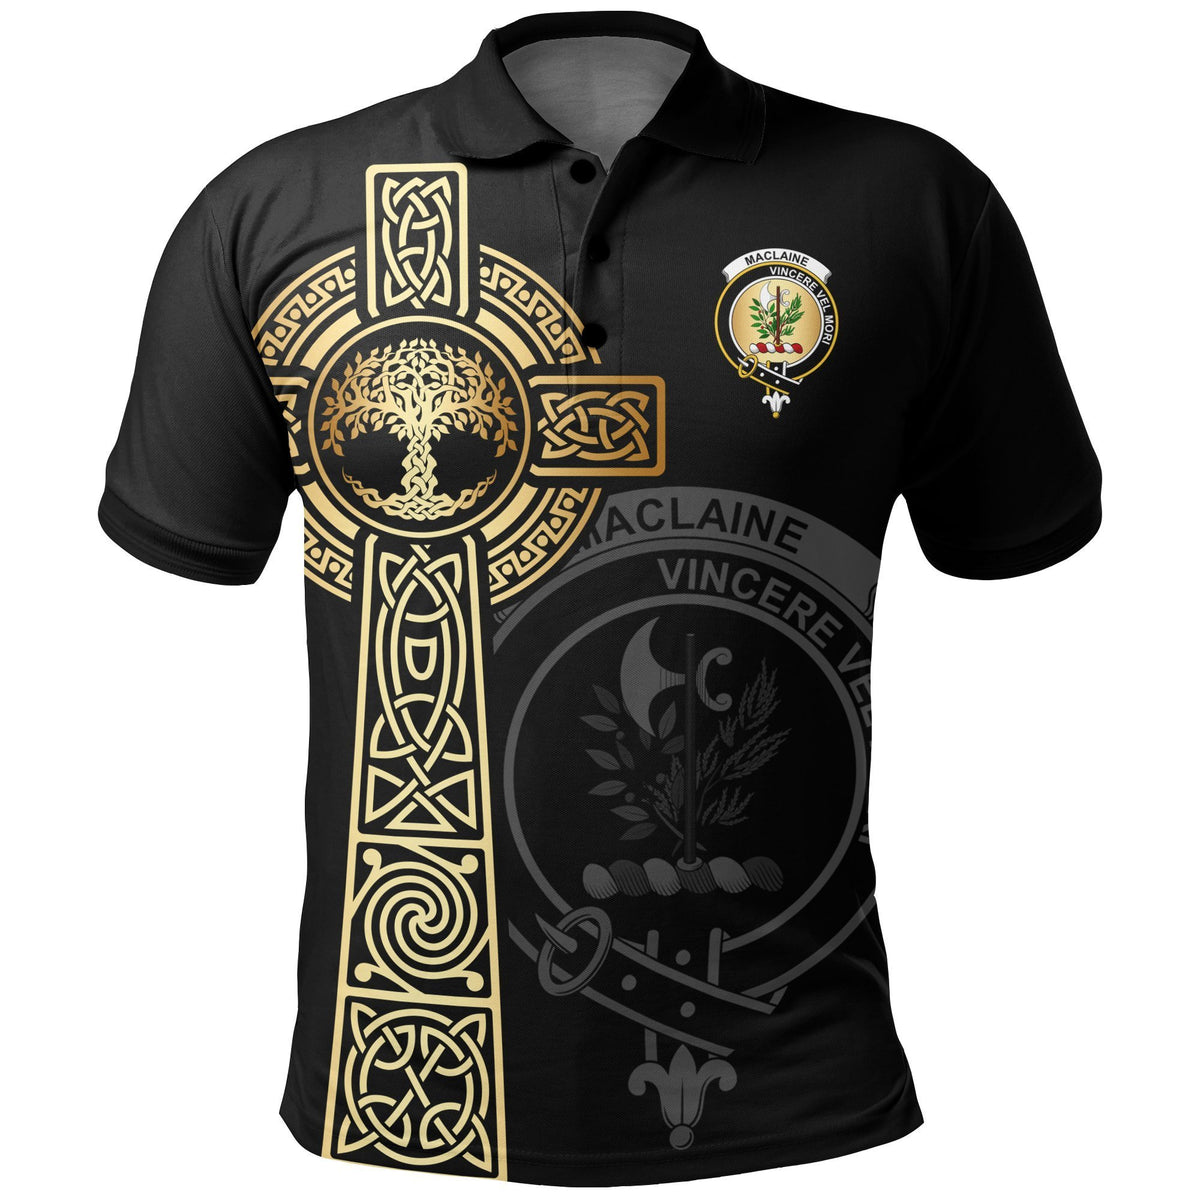 MacLaine (of Lochbuie) Clan Unisex Polo Shirt - Celtic Tree Of Life